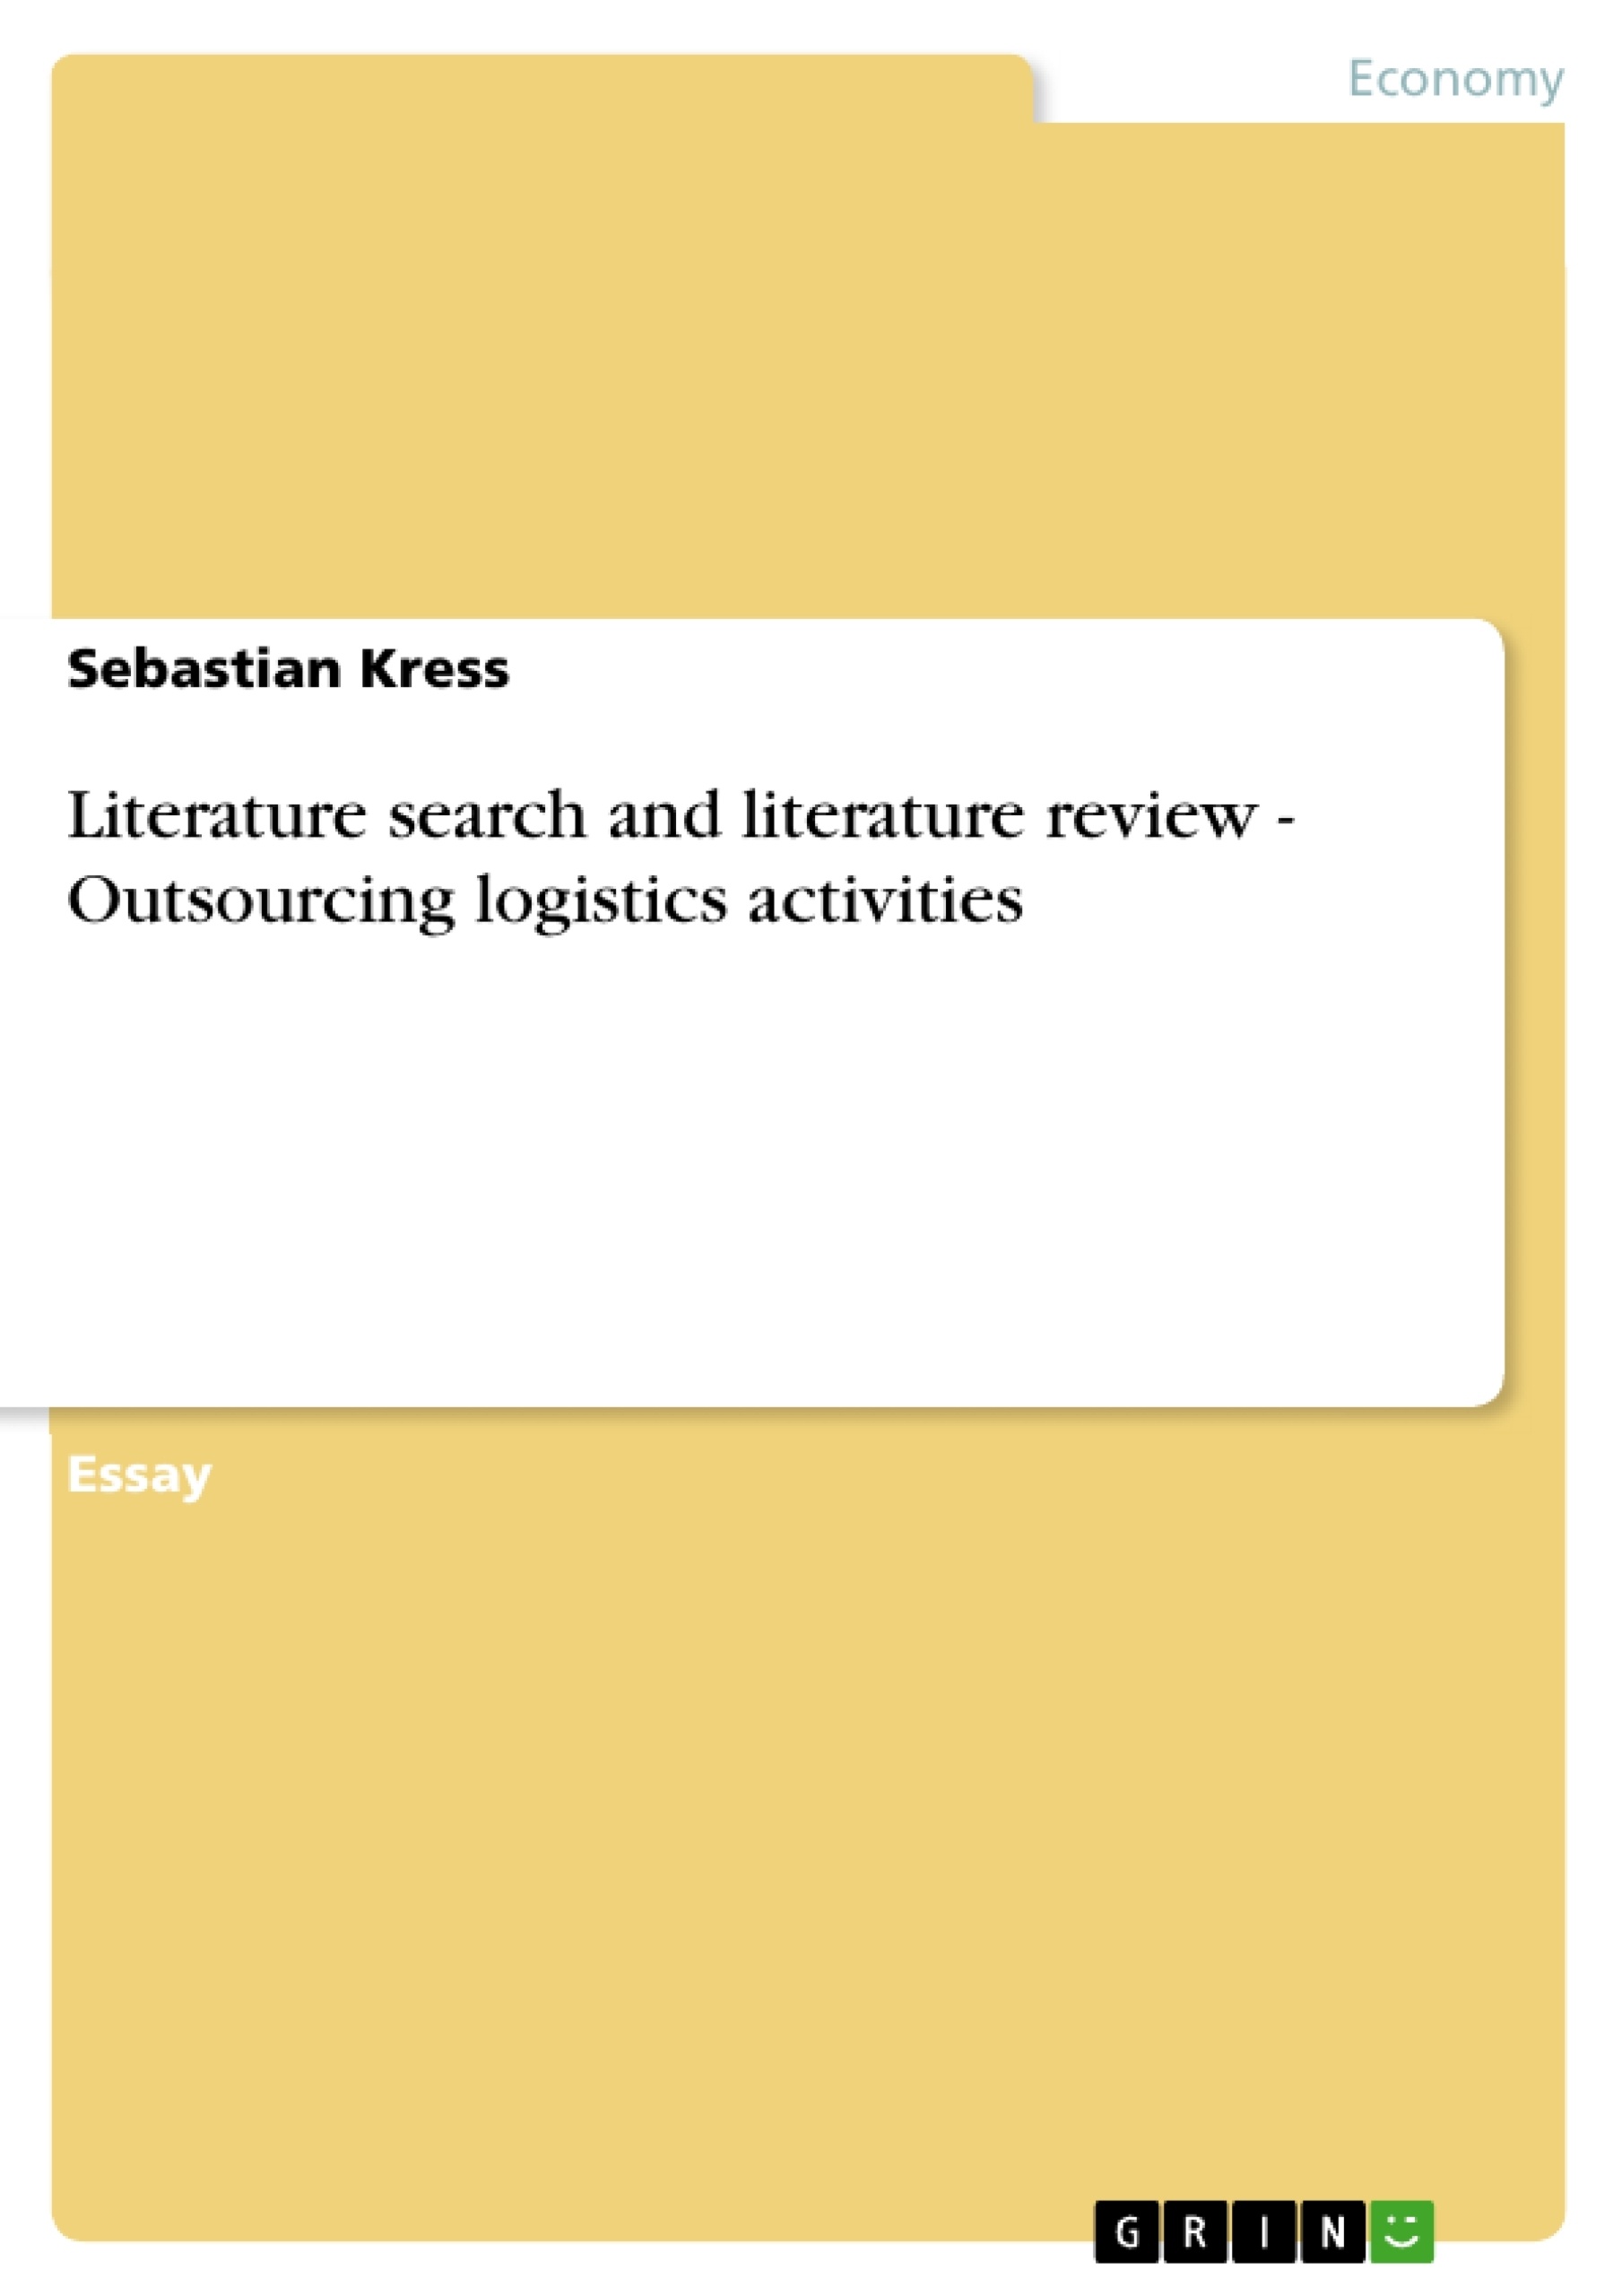 Title: Literature search and literature review - Outsourcing logistics activities 